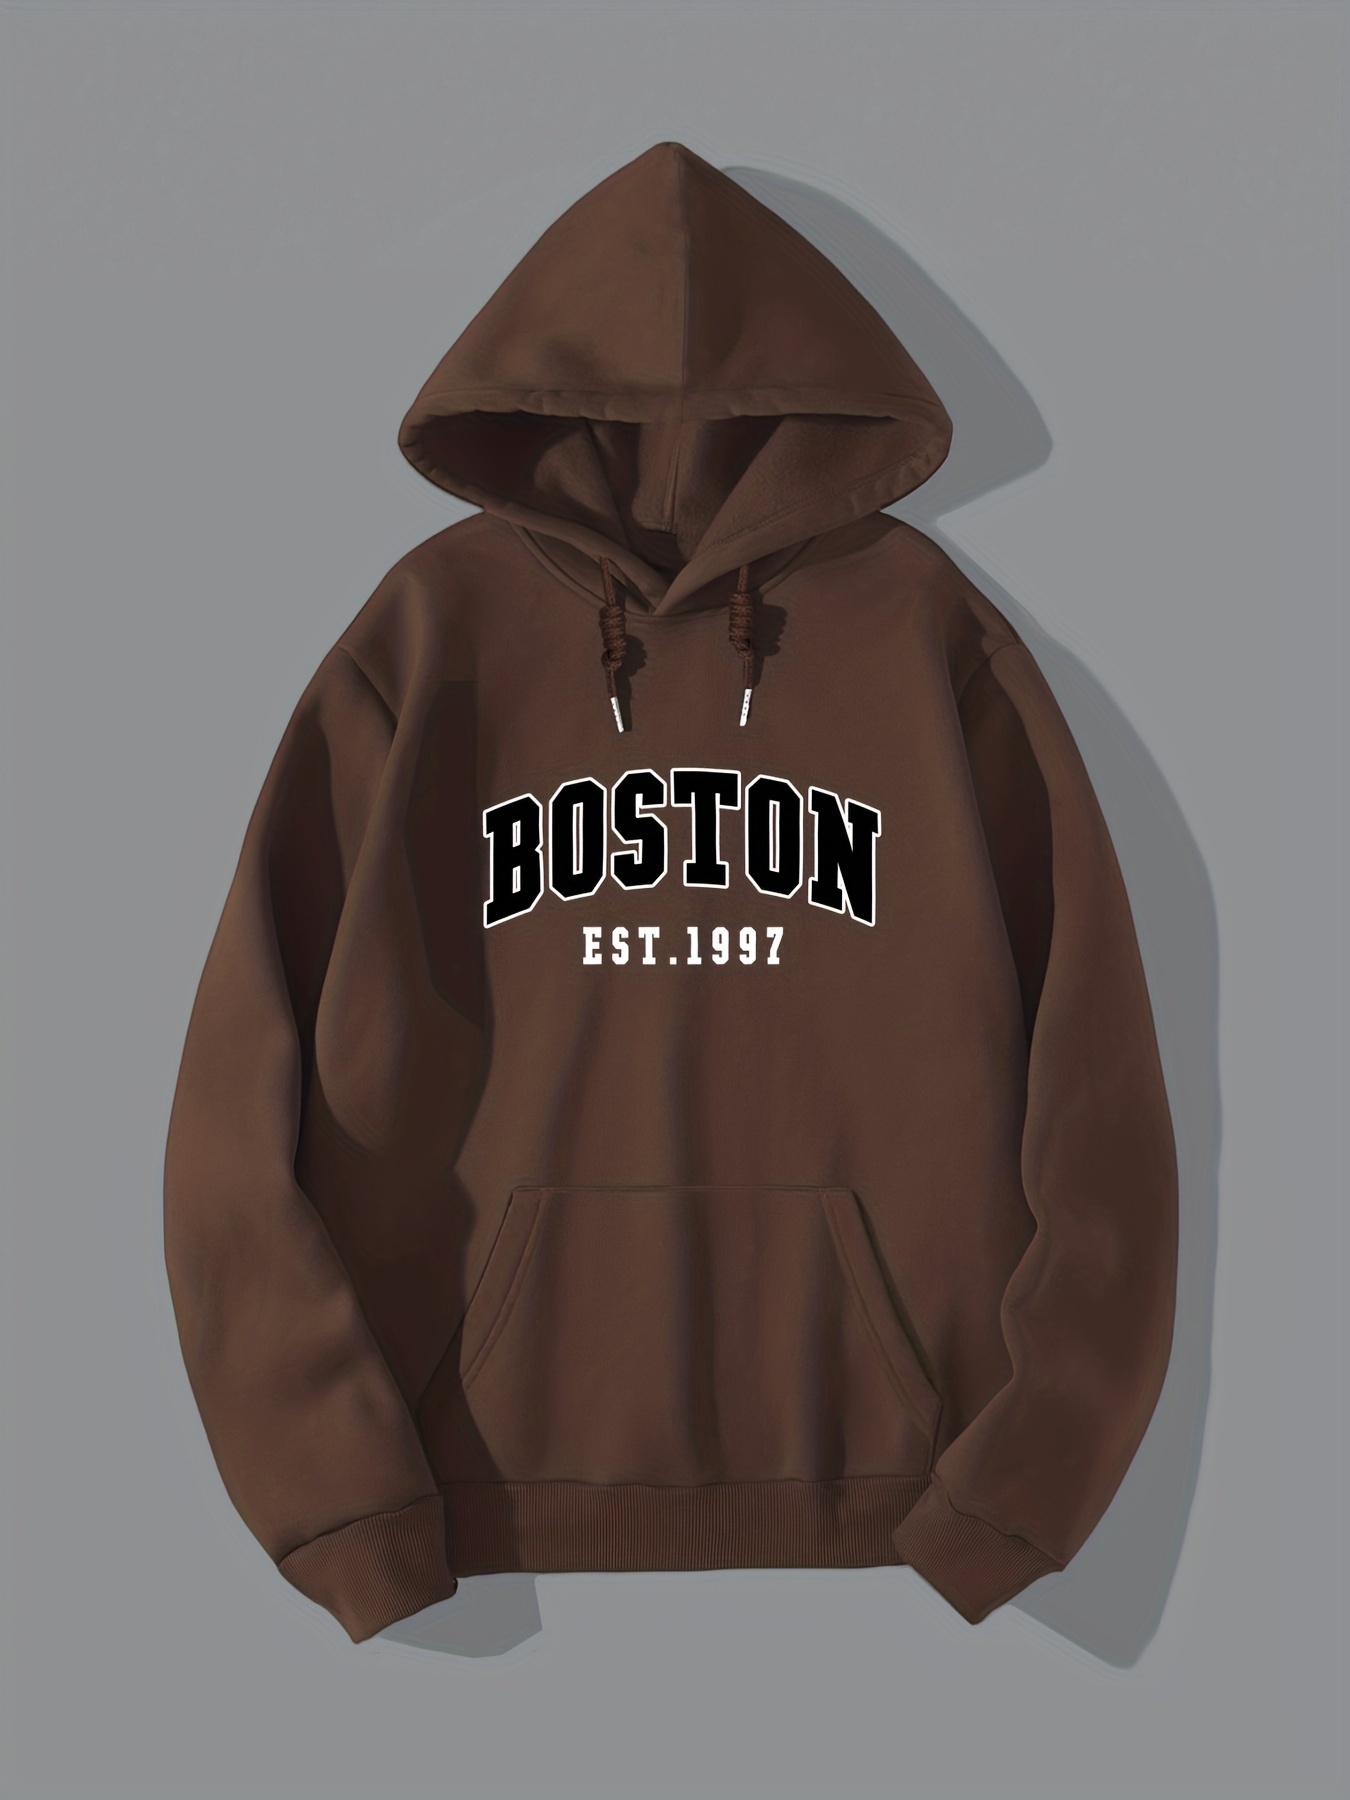 boston print mens hooded sweatshirt with kangaroo pocket mens chic pullover tops for fall winter details 0